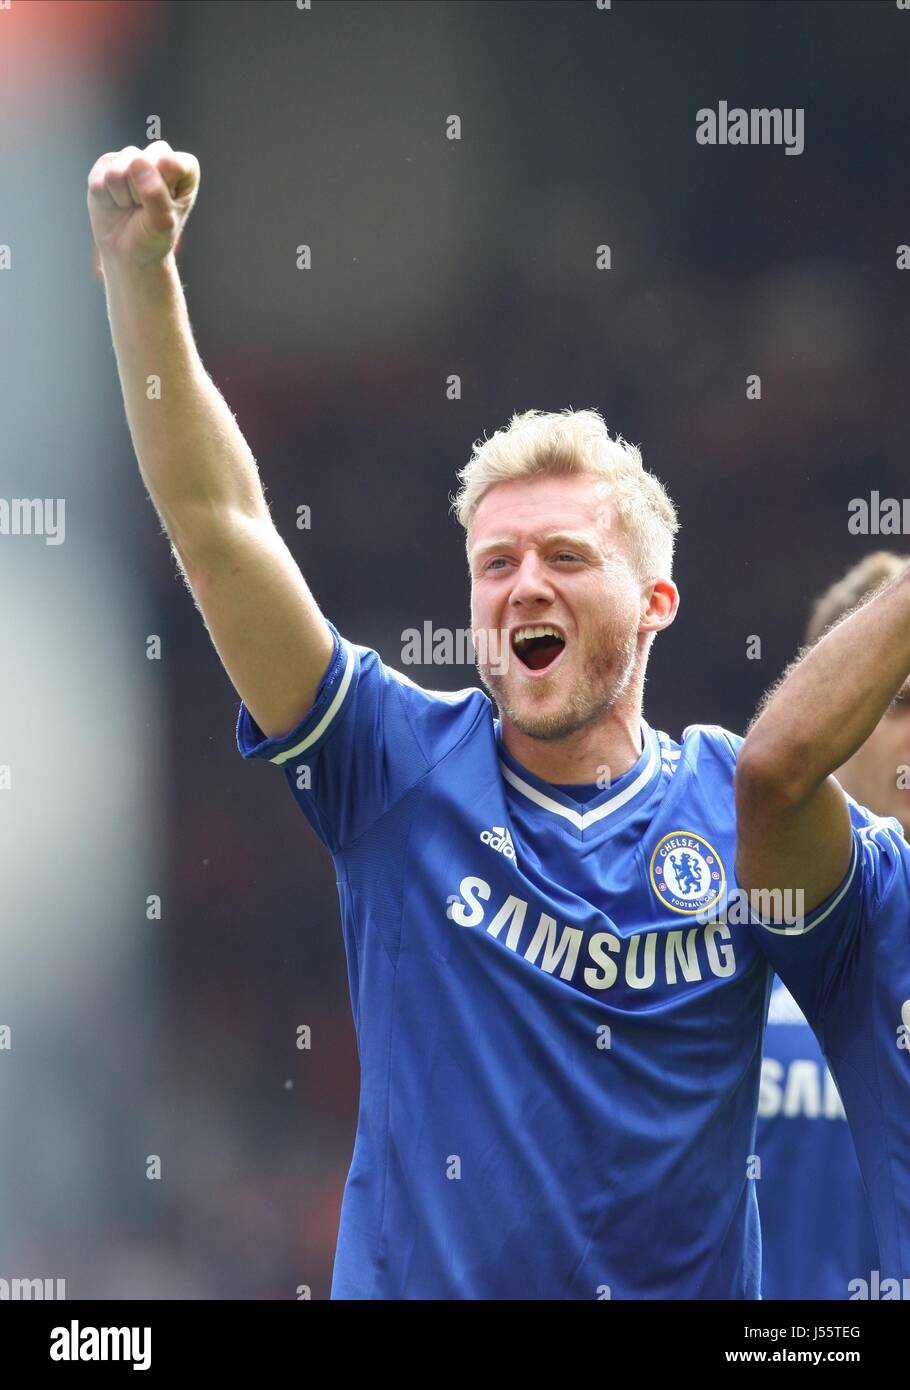 ANDRE SCHURRLE CHELSEA FC CHELSEA FC ANFIELD LIVERPOOL ENGLAND 27. April 2014 Stockfoto